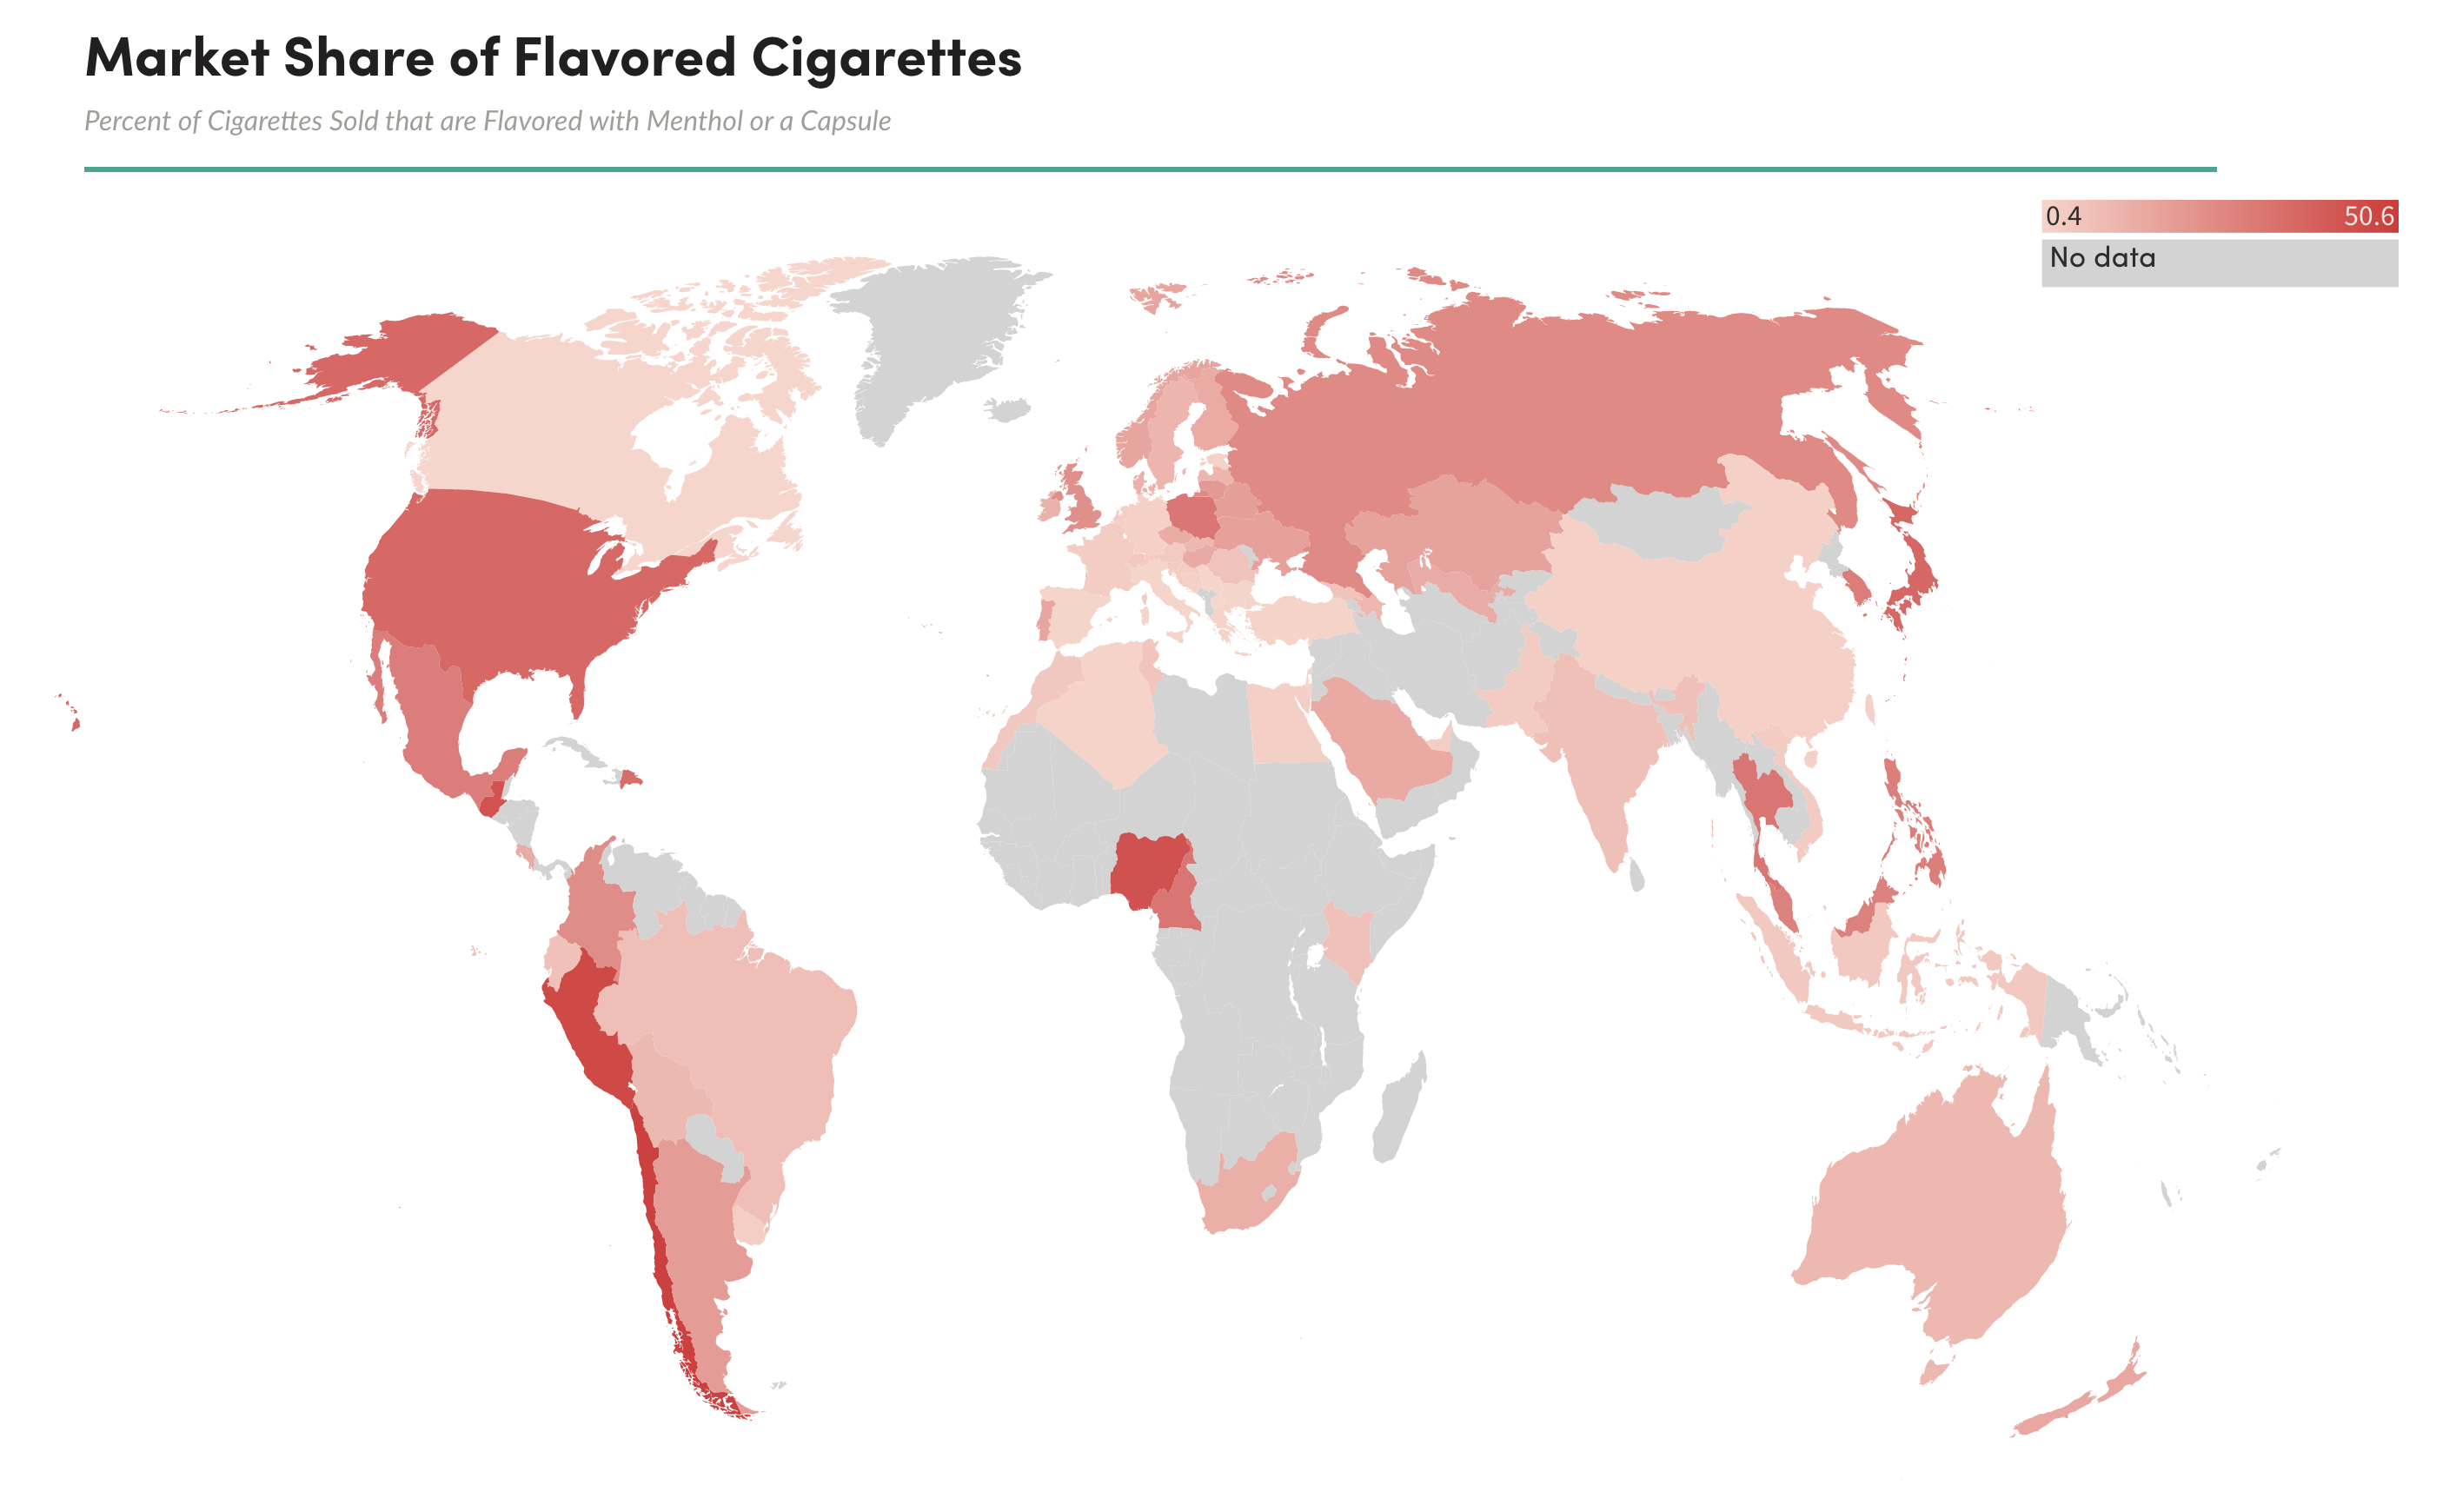 Market Share of Flavored Cigarettes